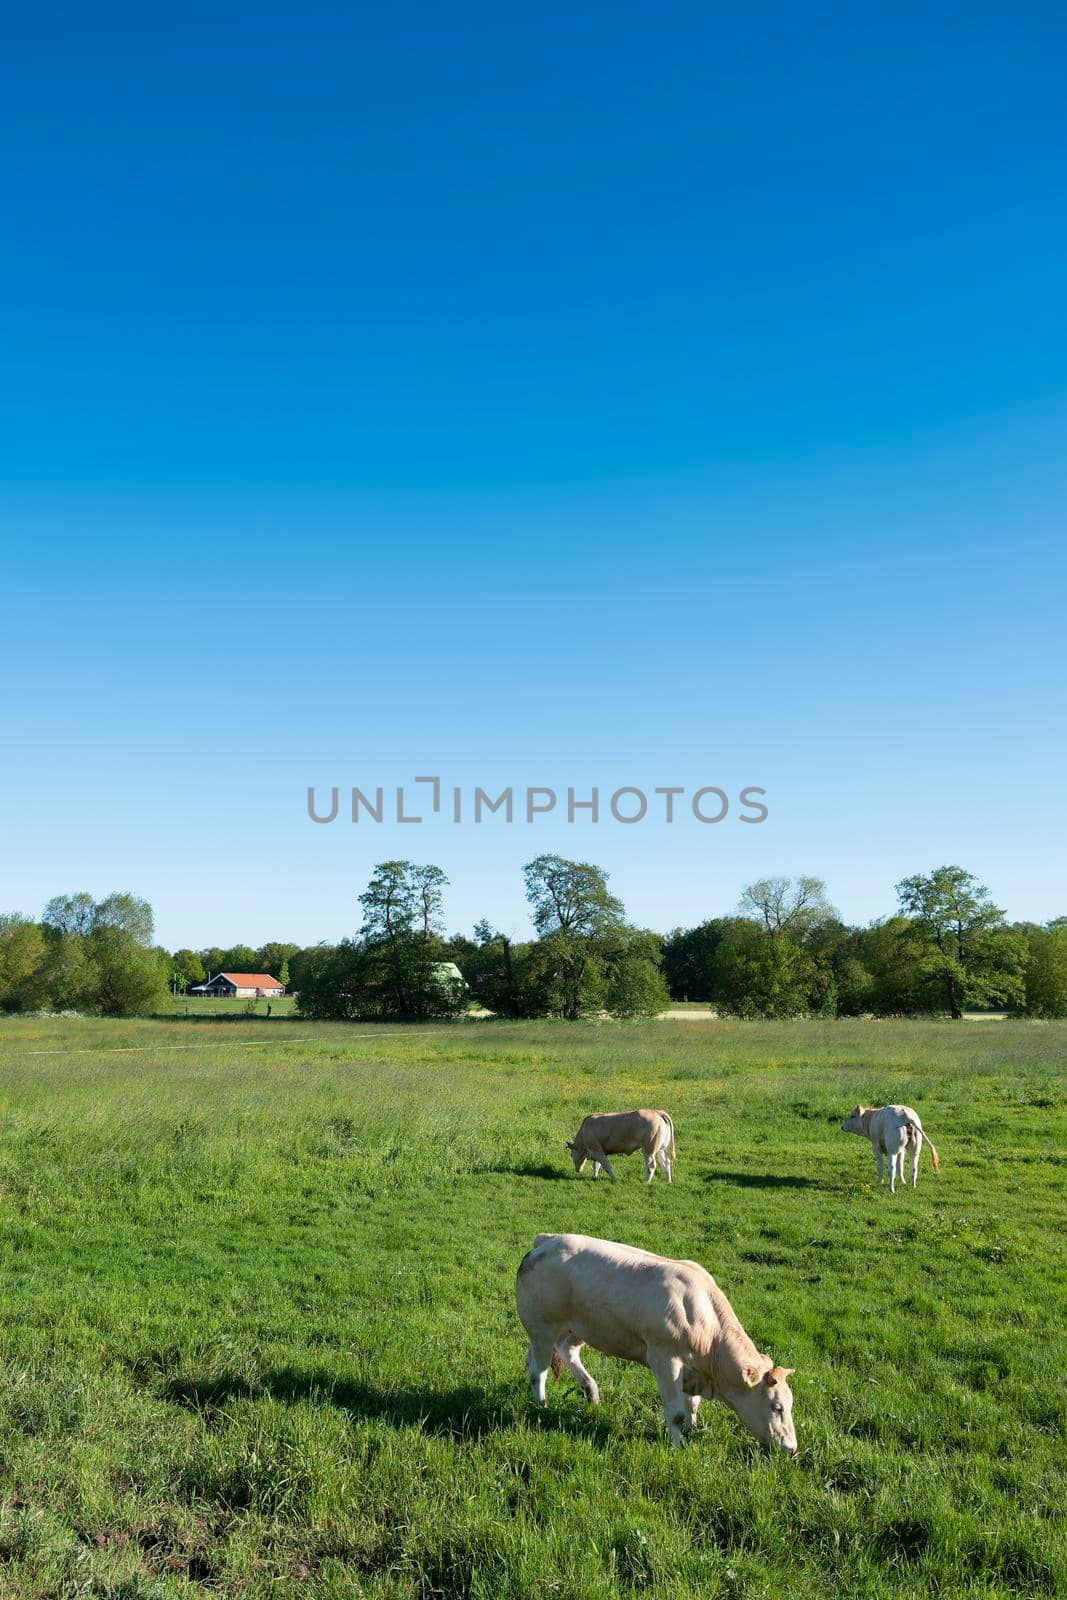 blonde d'aquitaine cows in rural landscape of twente near enschede and oldenzaal in the netherlands under blue summer sky with farm in the background